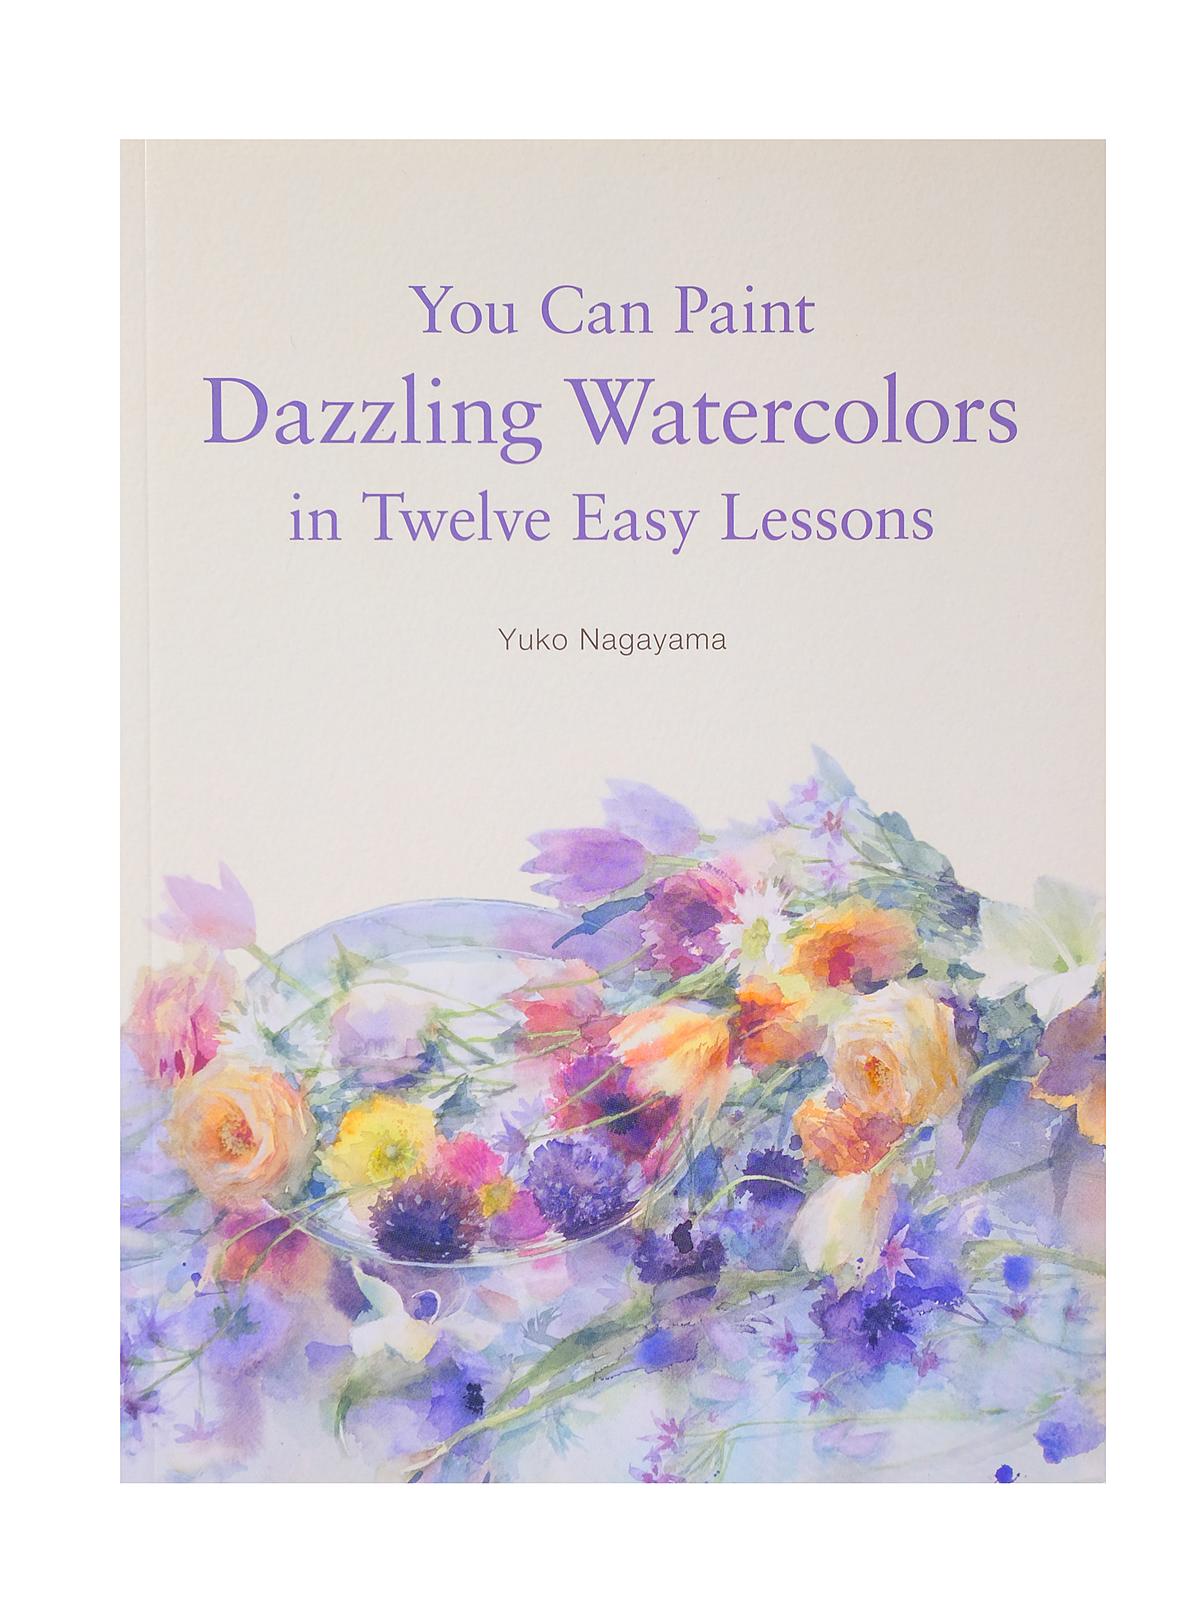 You Can Paint Dazzling Watercolors Each